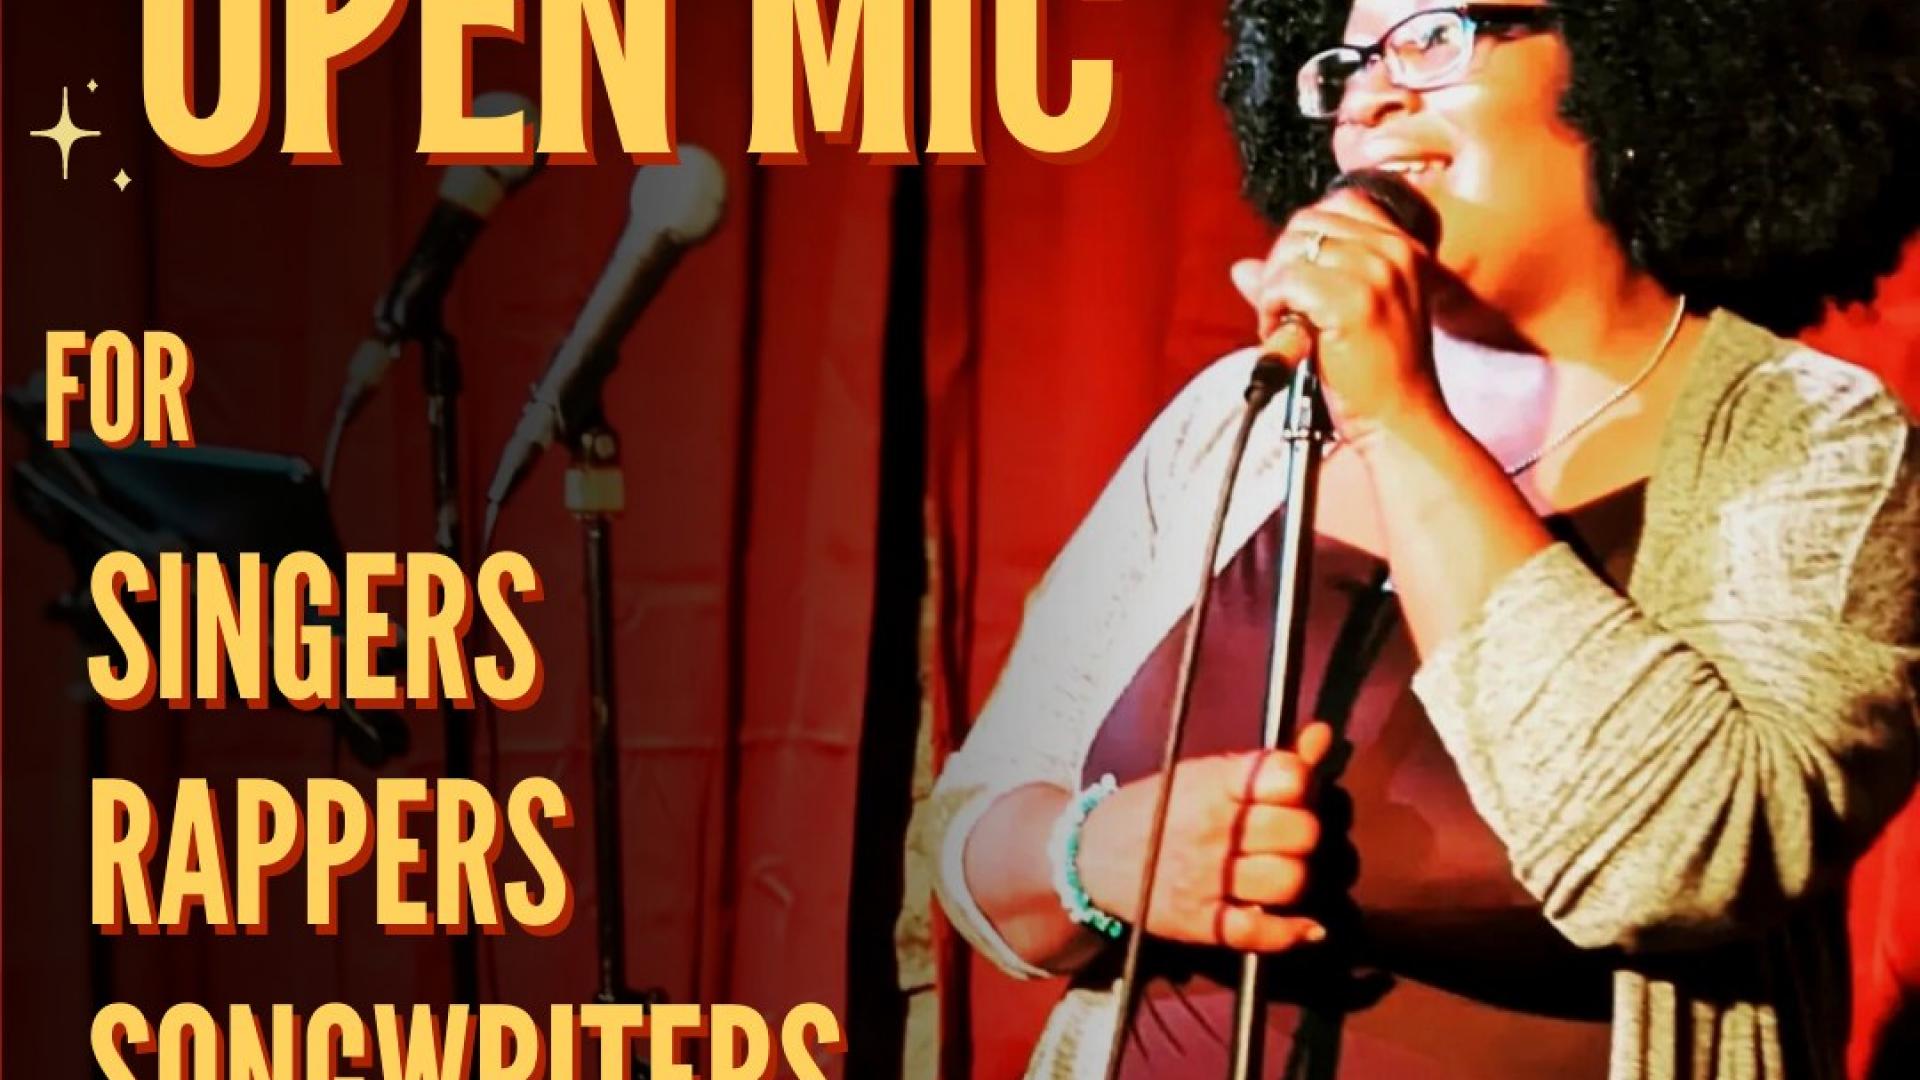 Singtrece's Open Mic for Singers, Rappers, Songwriters & Poets @ The Downstairs